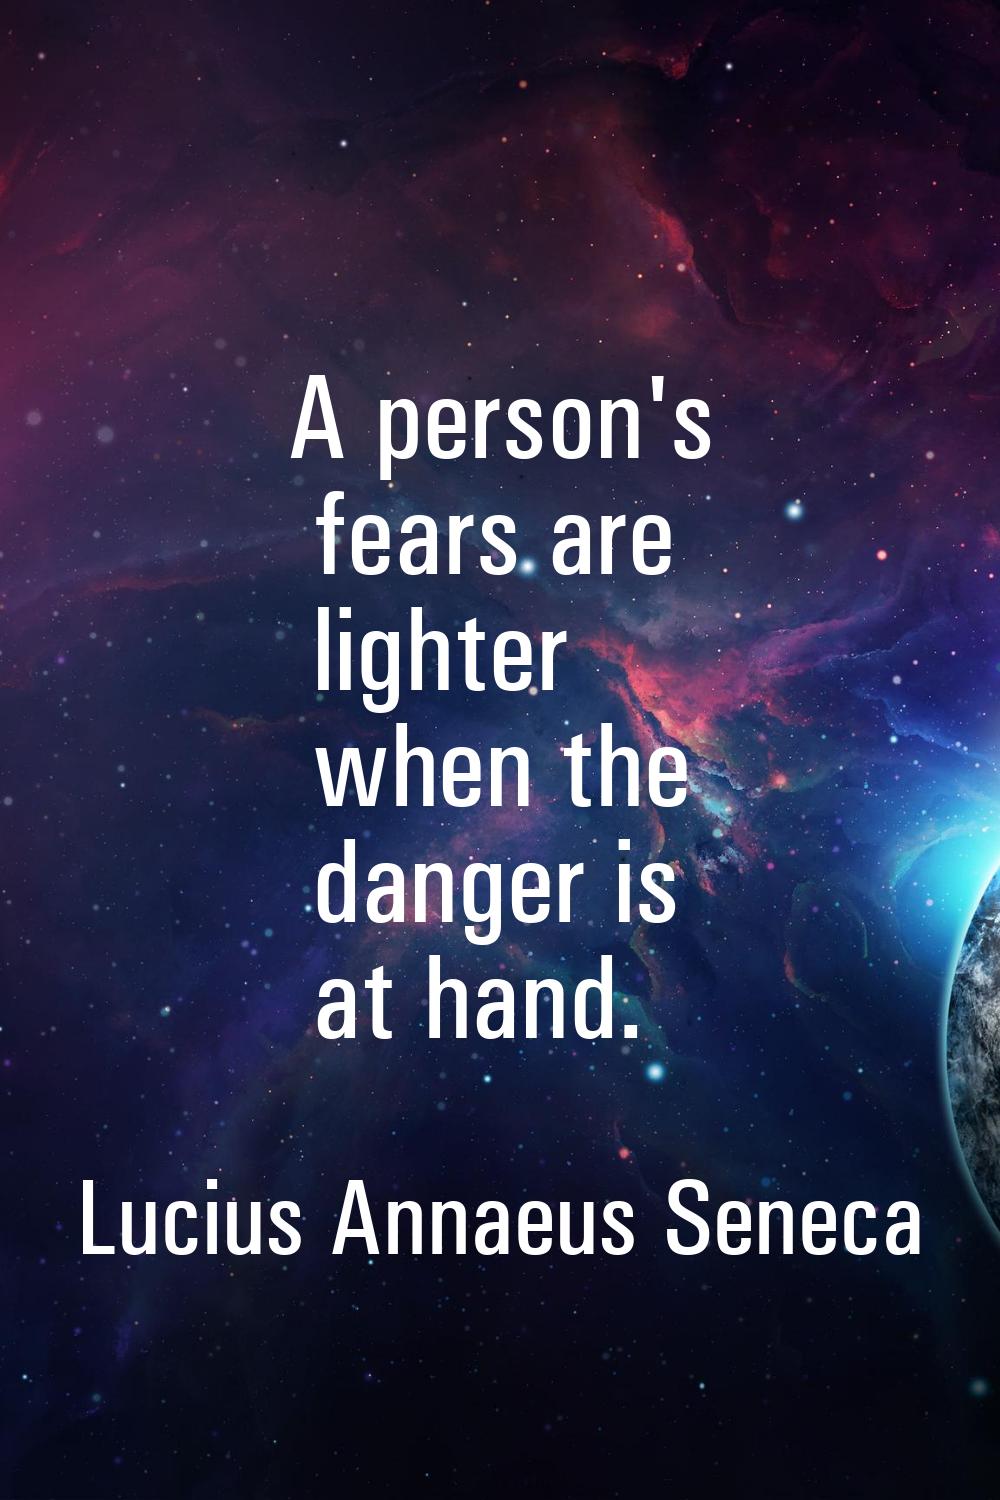 A person's fears are lighter when the danger is at hand.